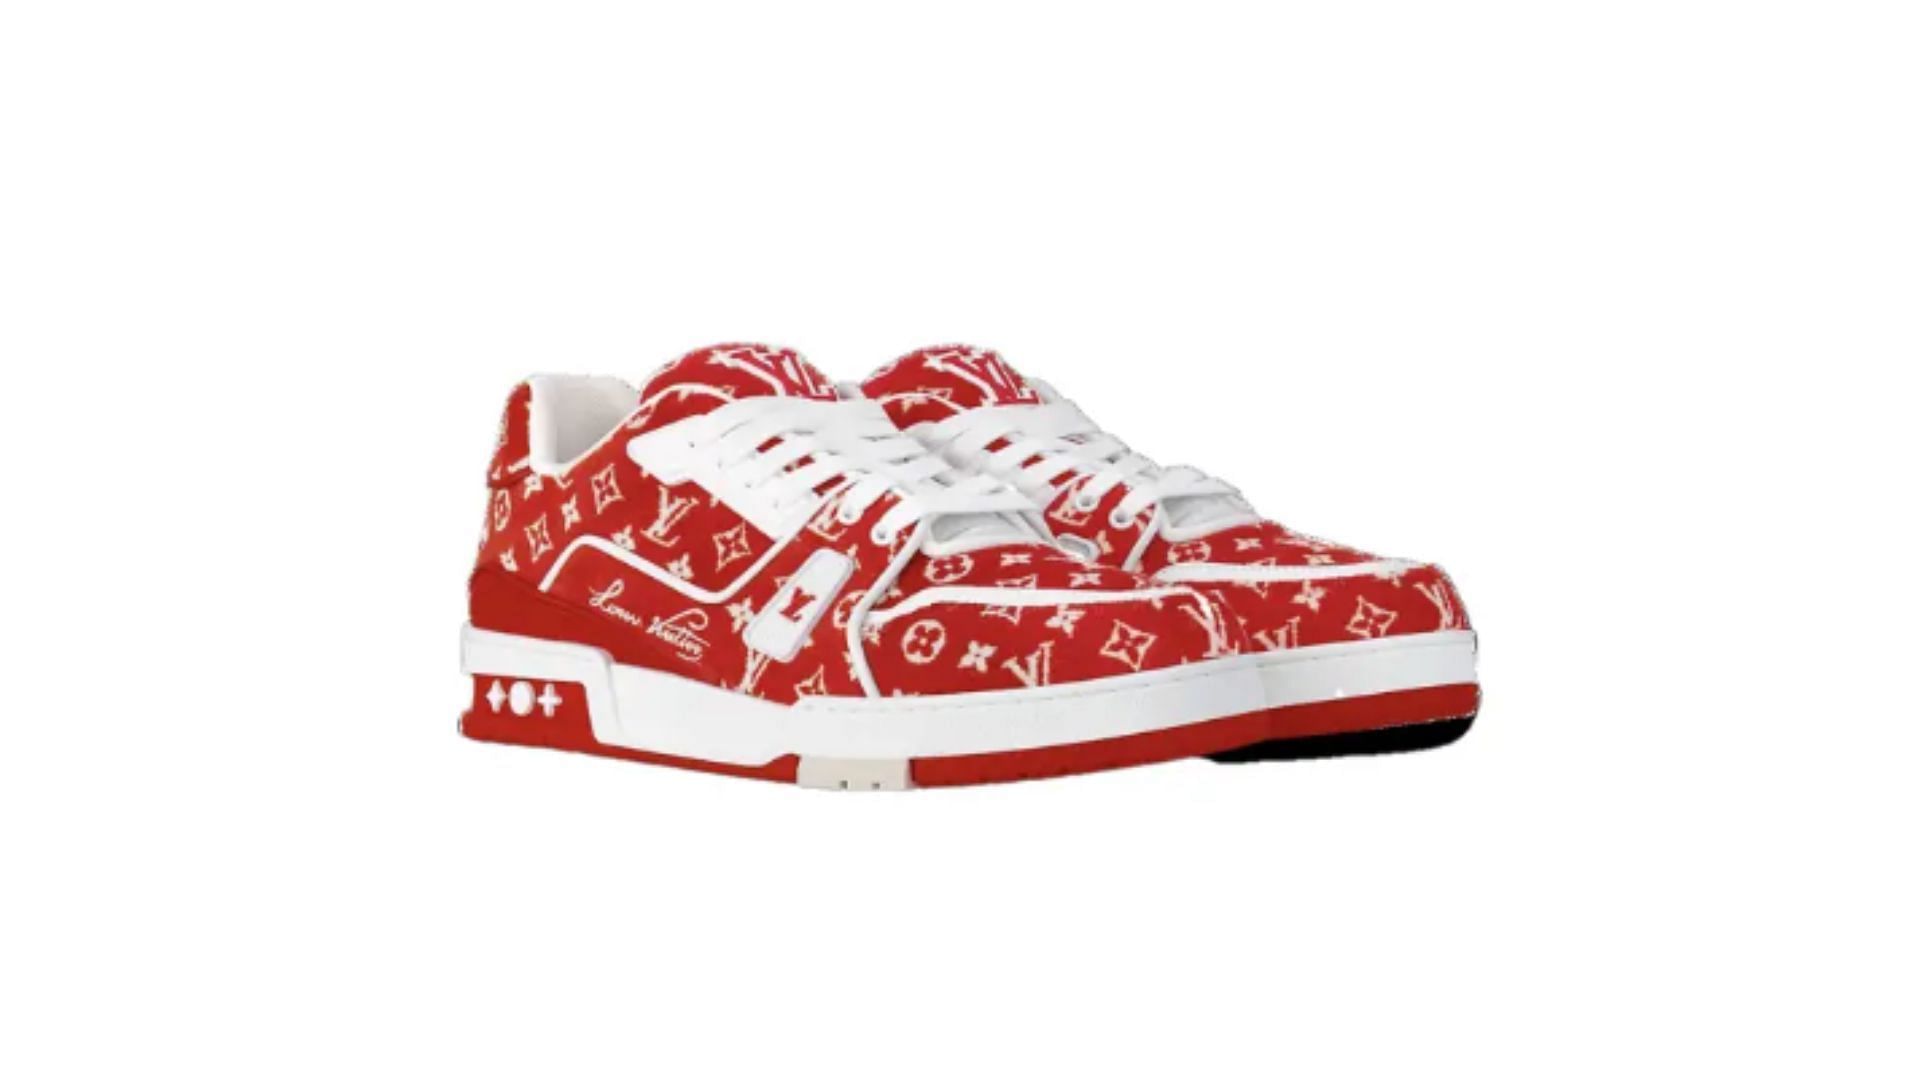 Brittany Mahomes Luis Vuitton shoes.